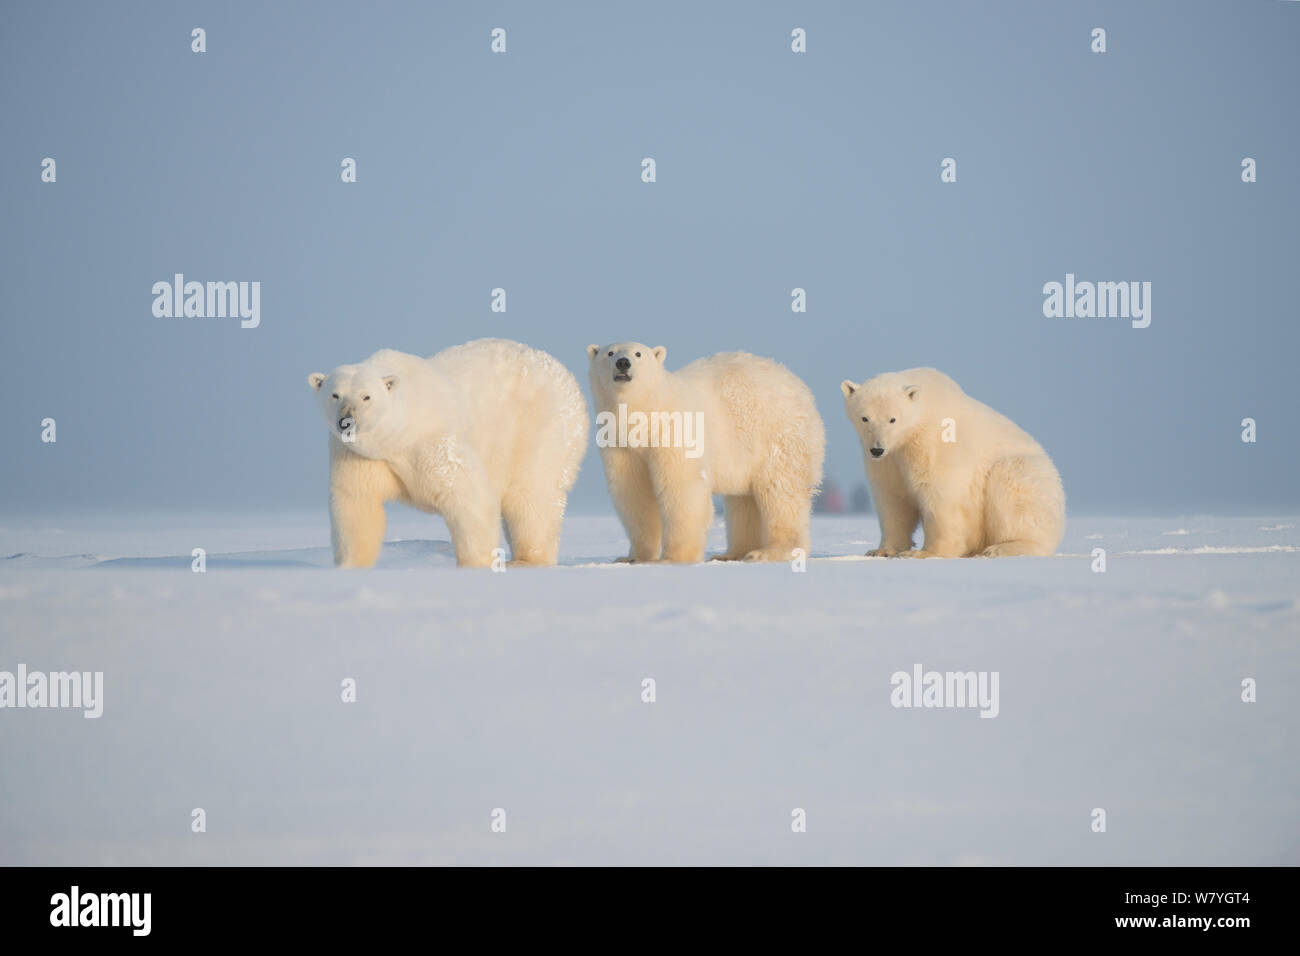 Polar bear (Ursus maritimus) mother with two juveniles, walking on newly formed pack ice during autumn freeze up, Beaufort Sea, off Arctic coast, Alaska Stock Photo